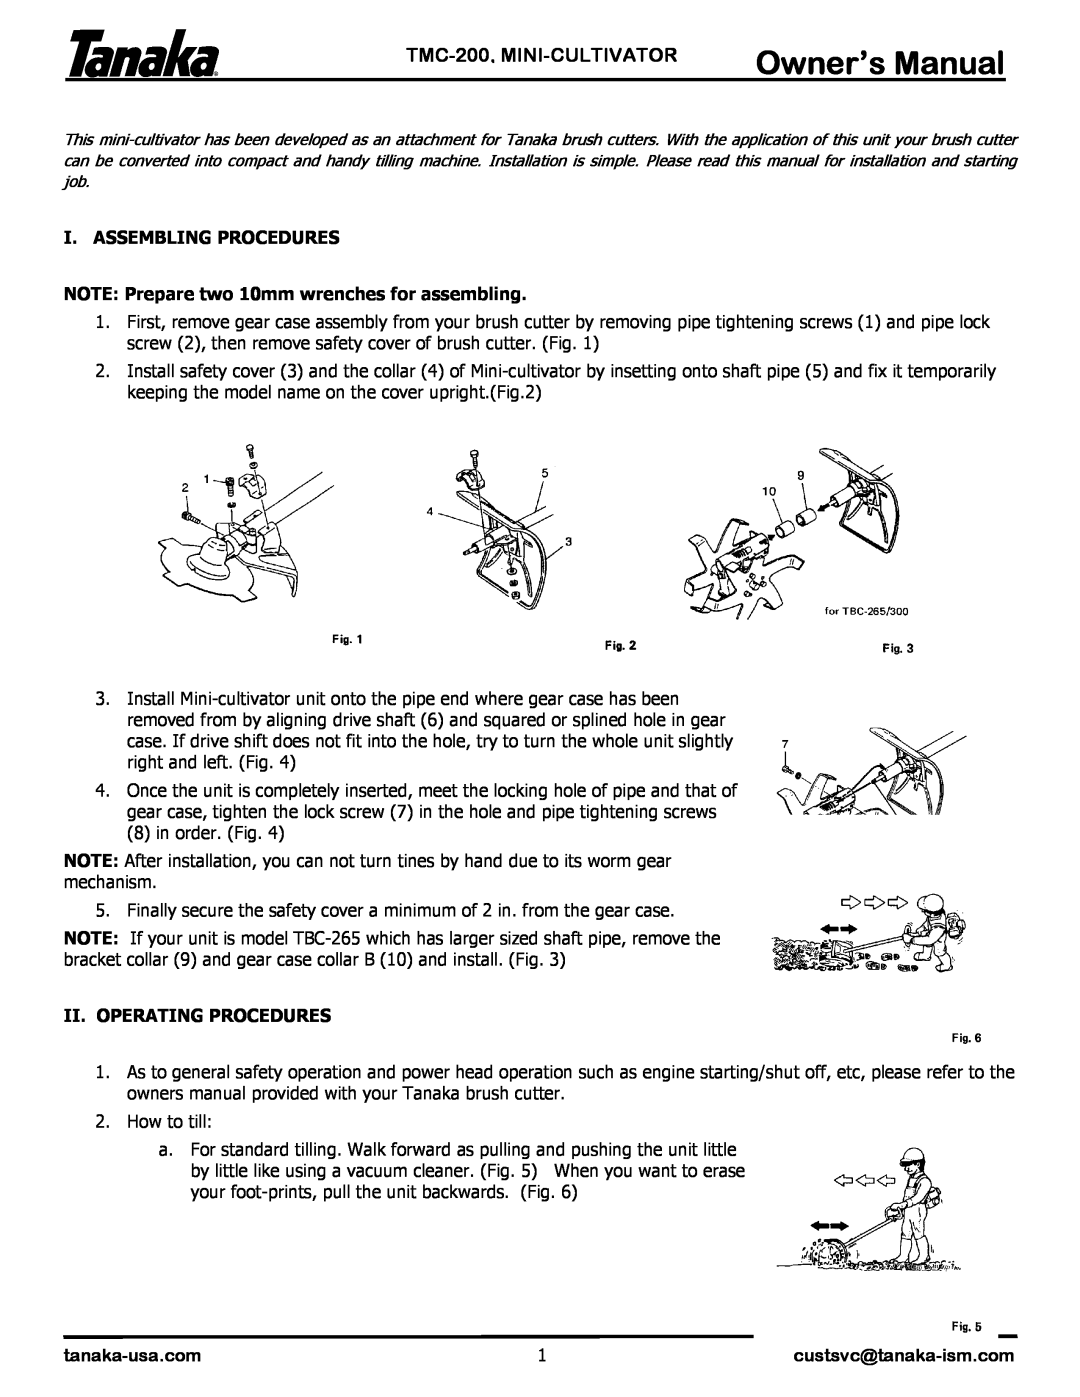 Tanaka manual TMC-200, MINI-CULTIVATOR, I. Assembling Procedures, NOTE Prepare two 10mm wrenches for assembling 